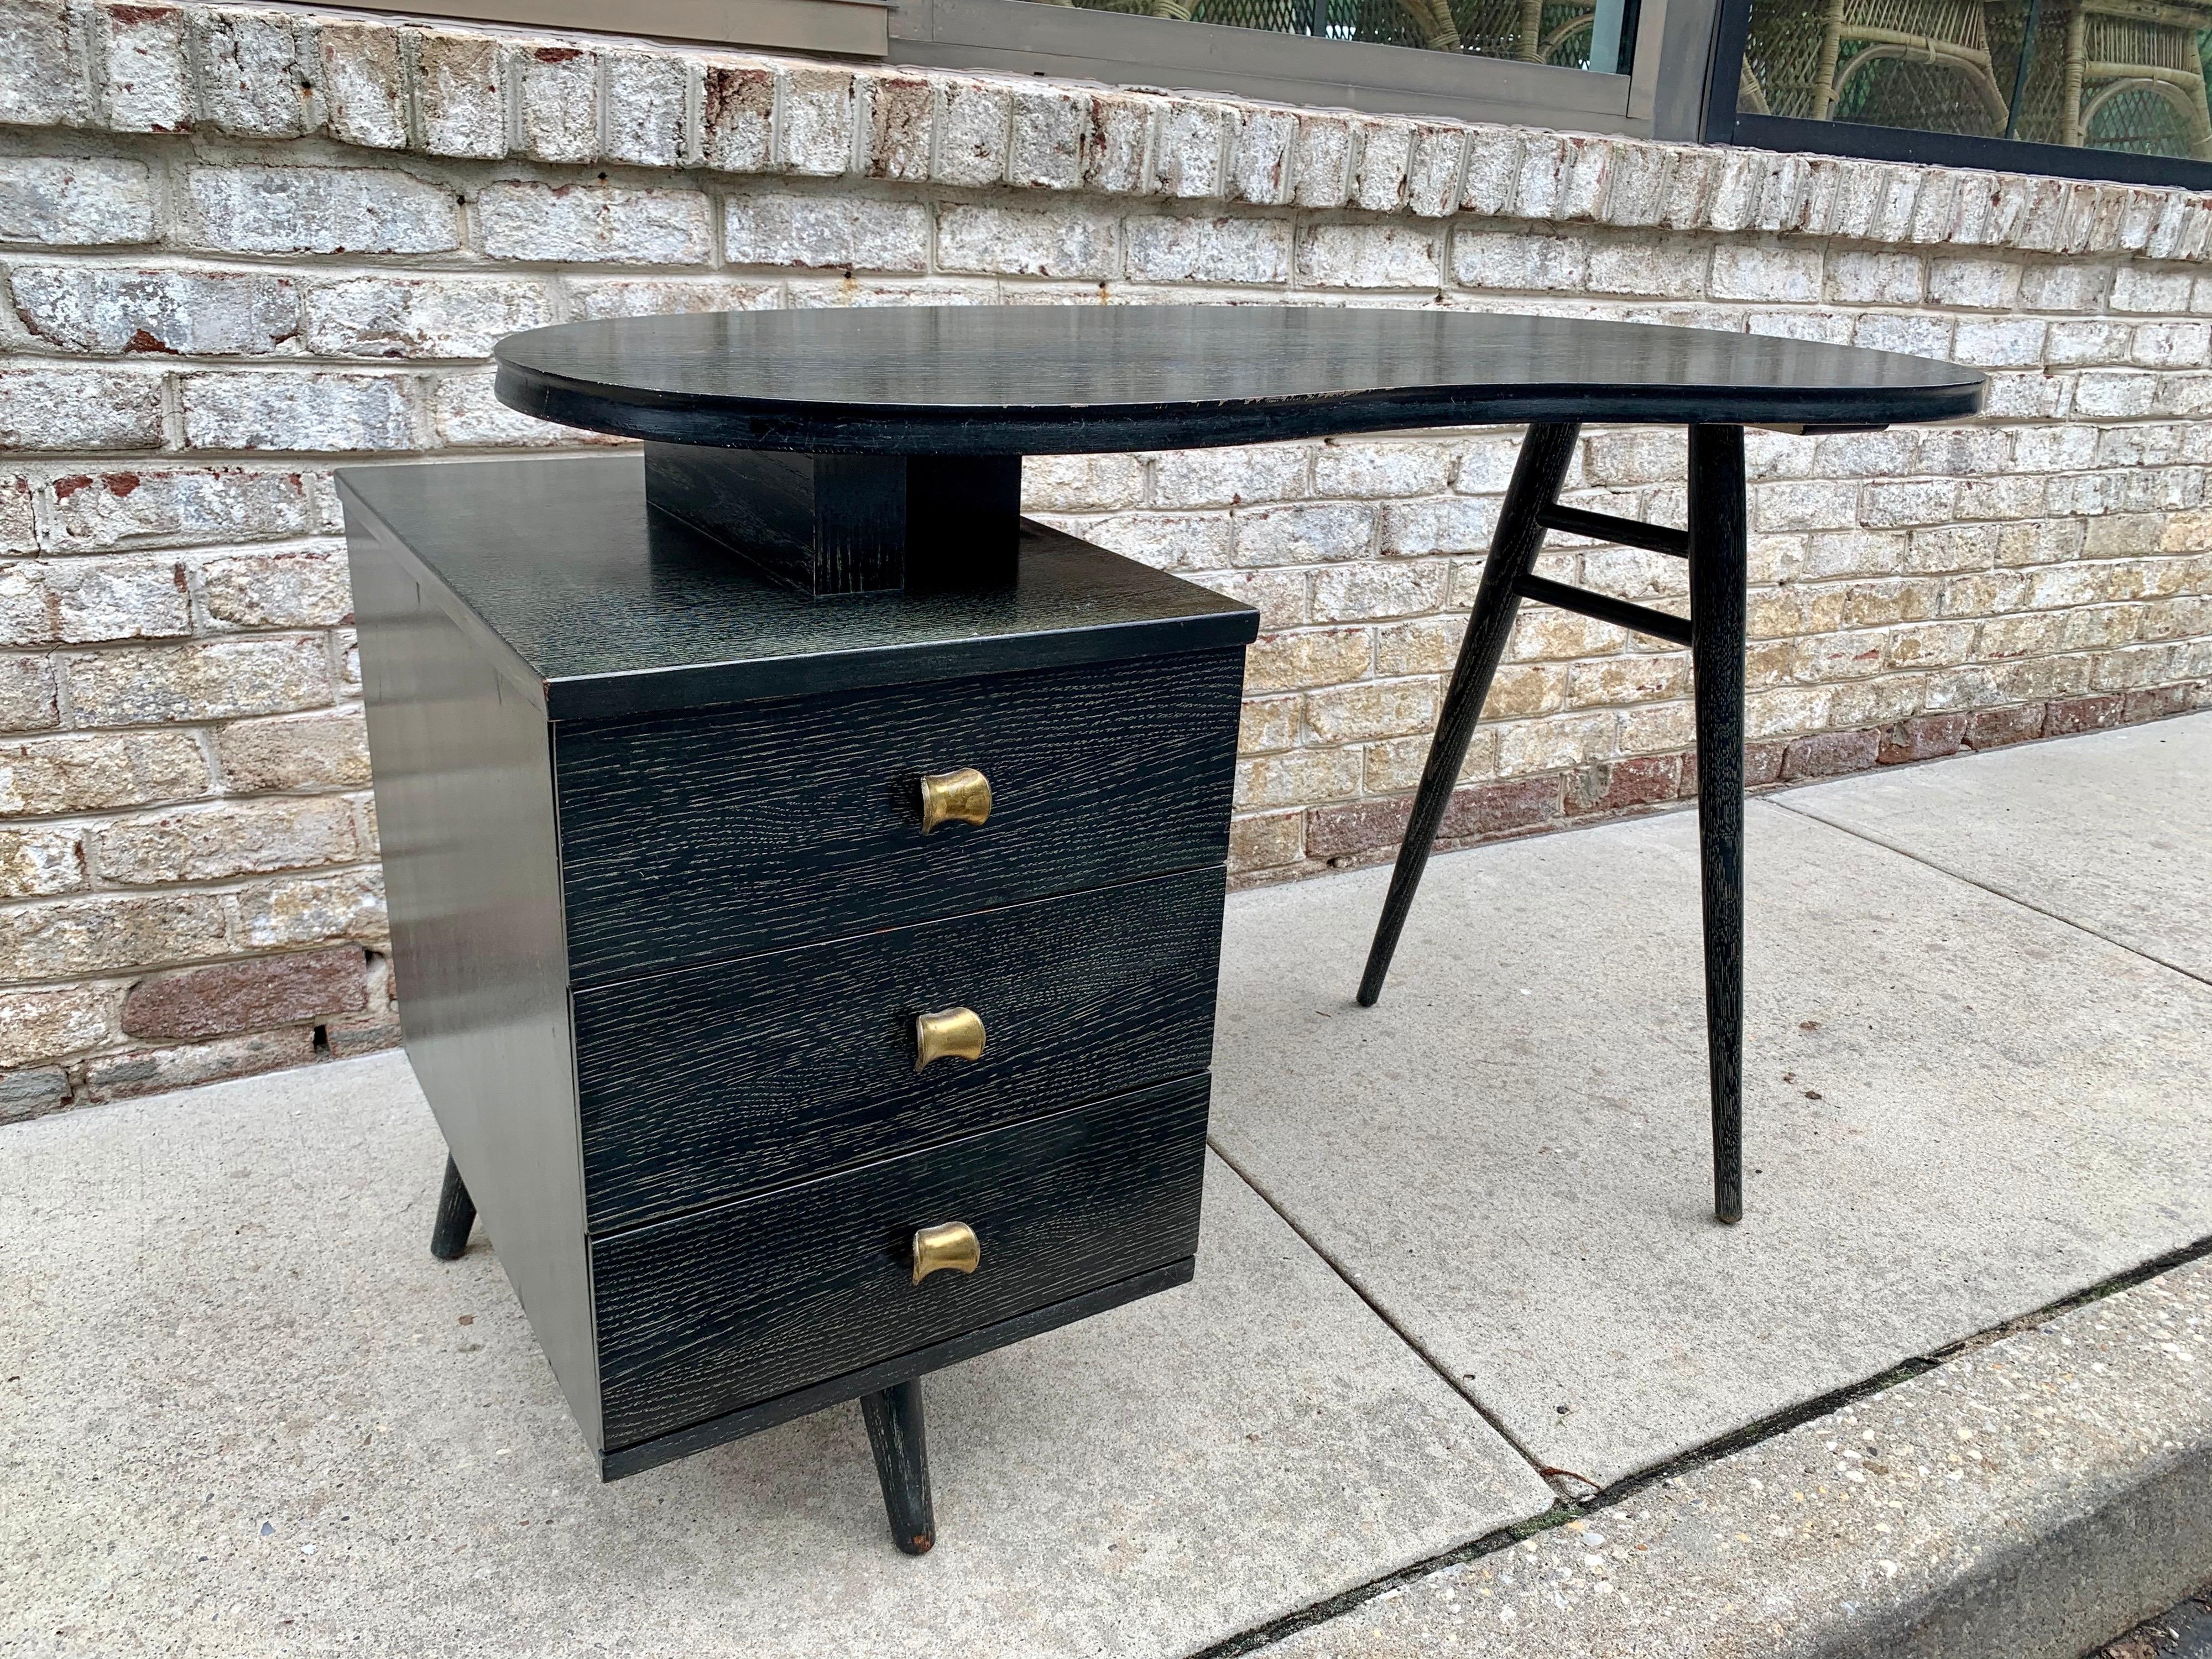 Extremely rare from the American Art Deco era. This kidney shaped desk in black cerused oak (original finish) with tree drawers and turned legs, in as found condition is a truly a unique piece.